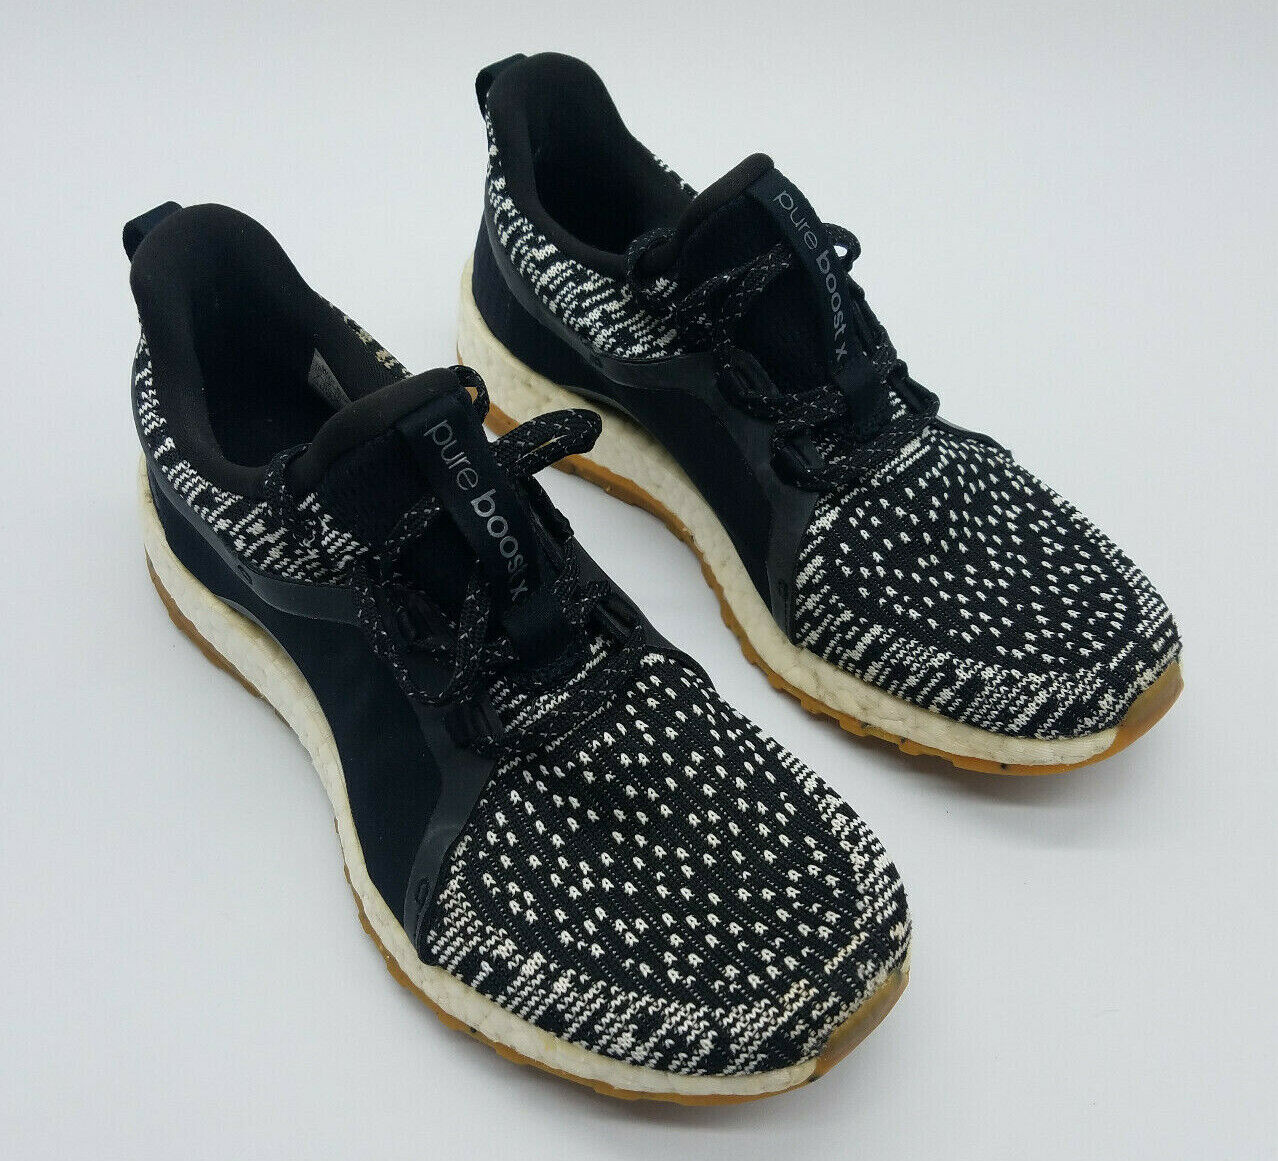 Pure Boost X All Terrain Running Shoes BY2691 Black White 7 | eBay